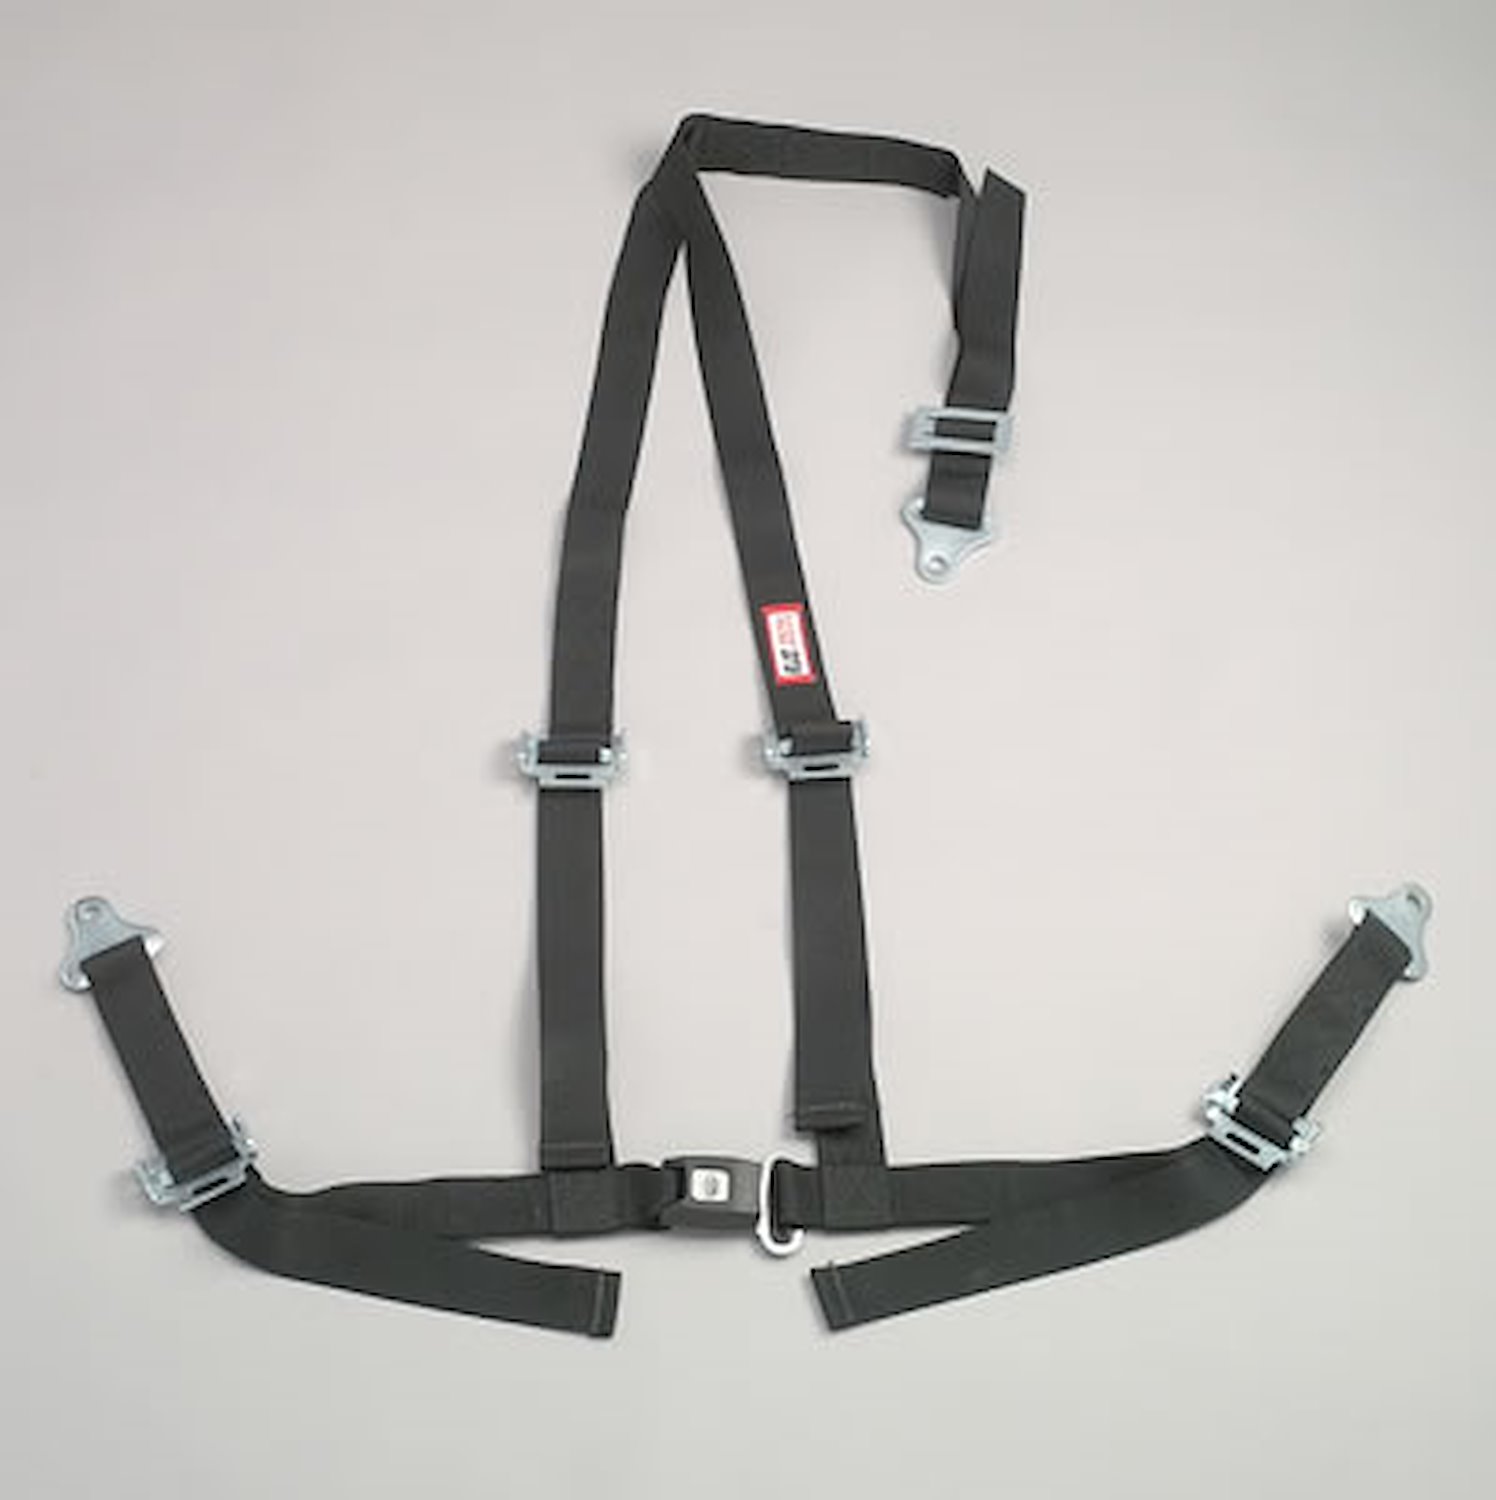 NON-SFI B&T HARNESS 2 PULL UP Lap Belt 2 S. H. Y FLOOR Mount ALL WRAP ENDS KHAKI